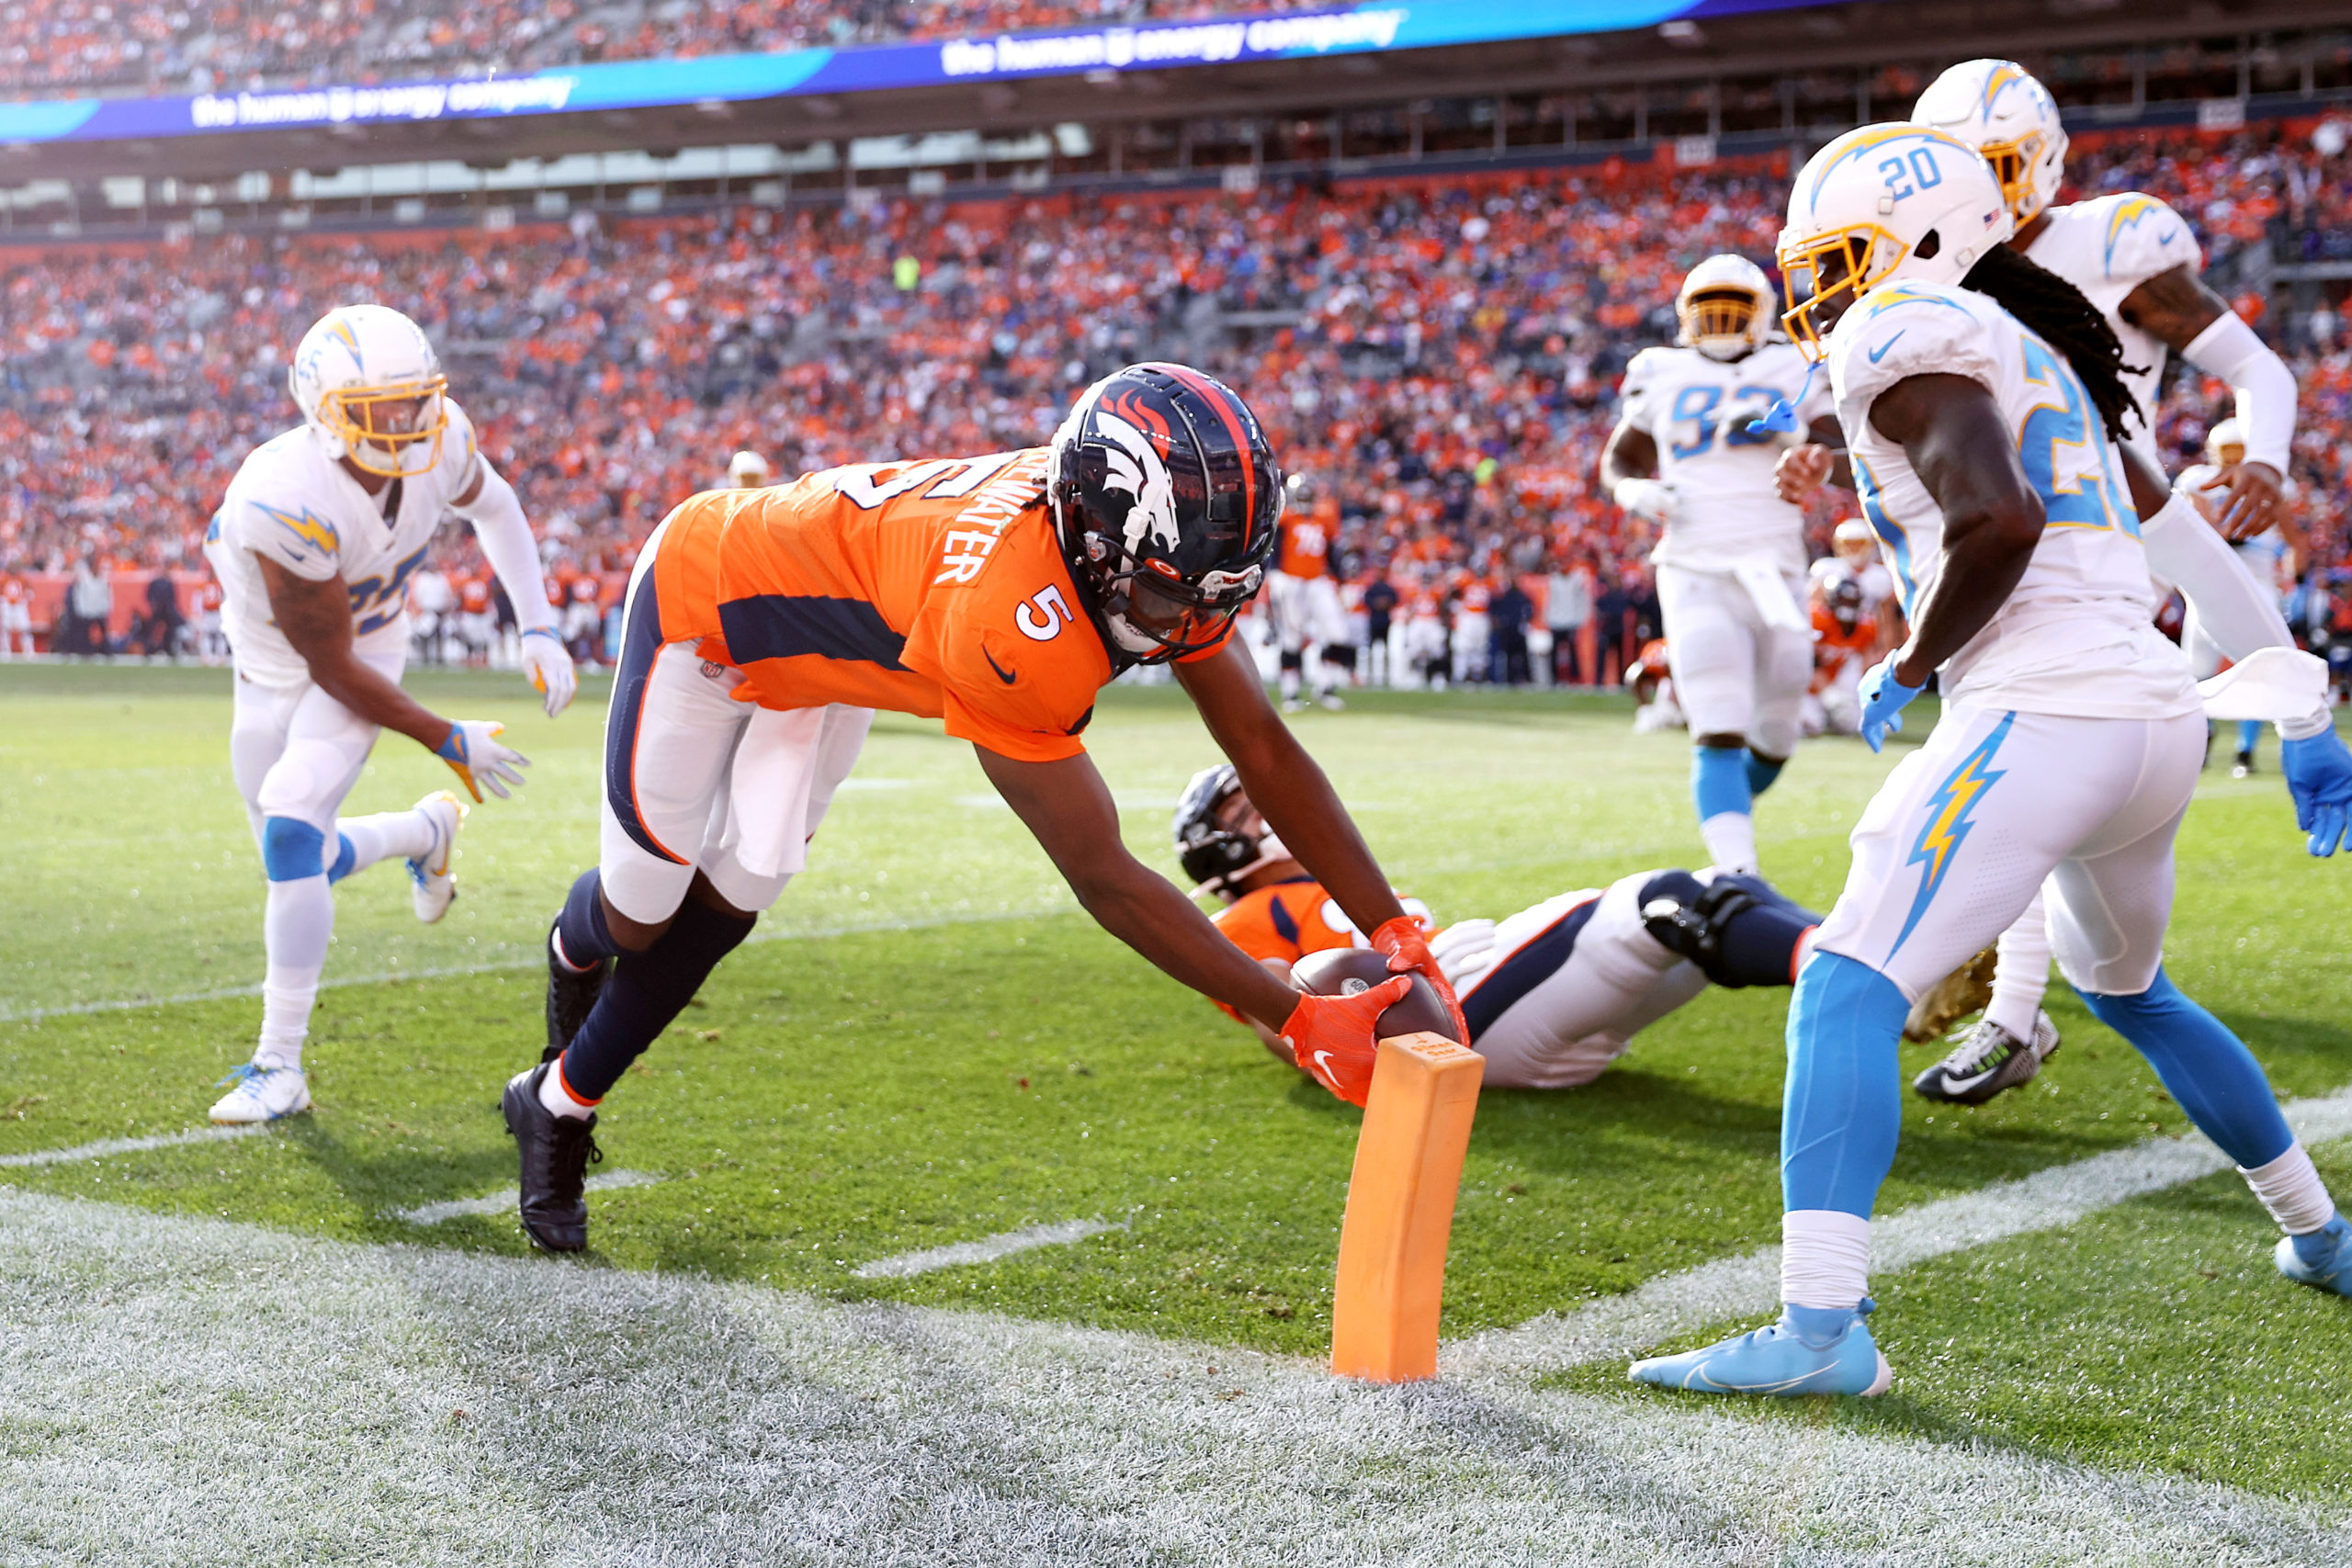 DENVER, COLORADO - NOVEMBER 28: Teddy Bridgewater #5 of the Denver Broncos dives for a touchdown in the first quarter of the game against the Los Angeles Chargers at Empower Field At Mile High on November 28, 2021 in Denver, Colorado. (Photo by Matthew Stockman/Getty Images)